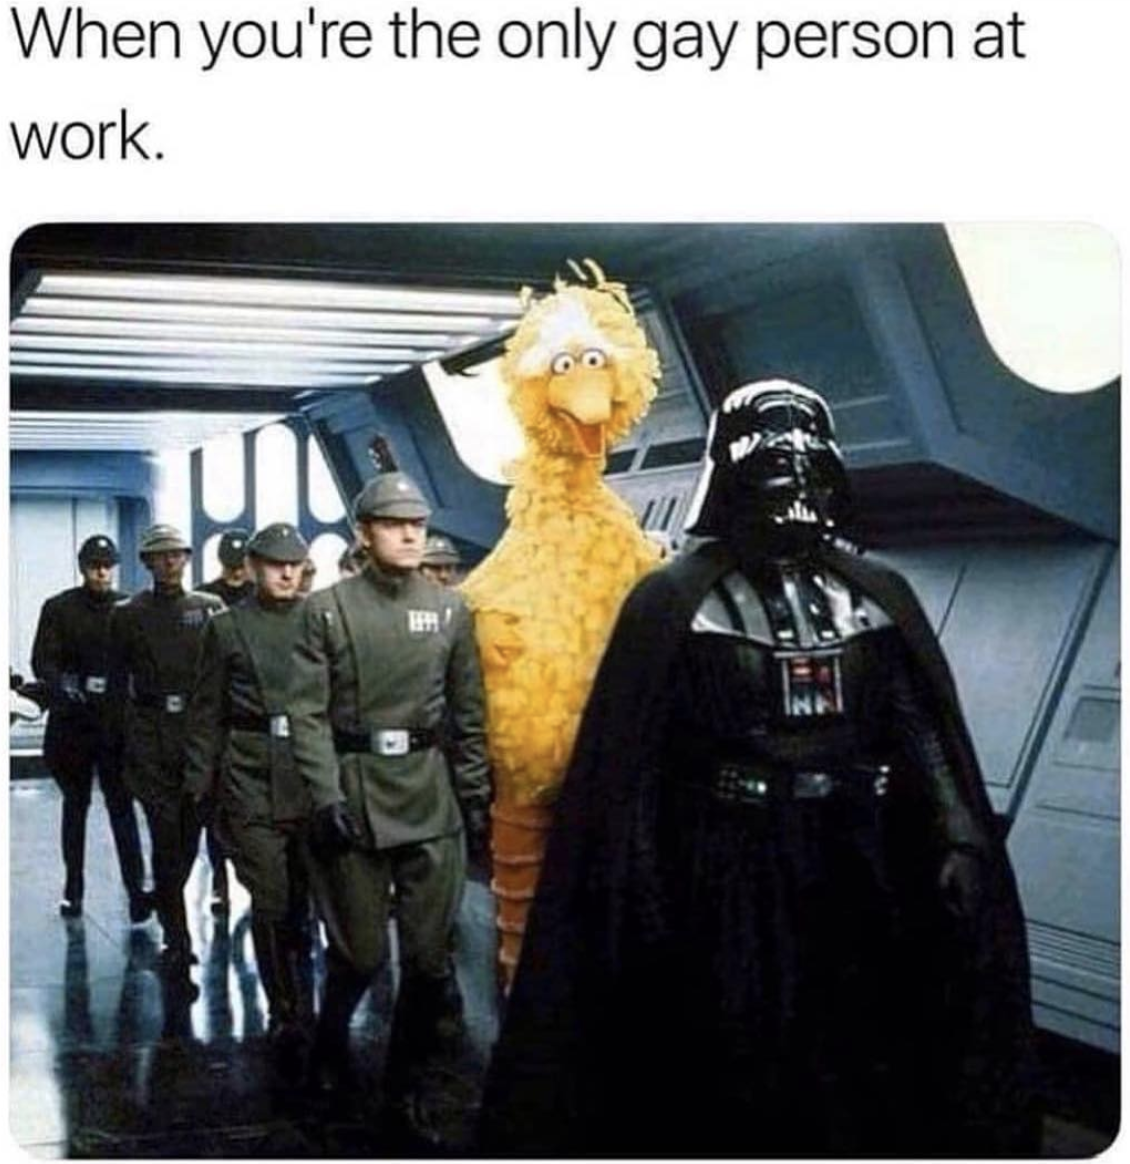 the person above is the big gay meme